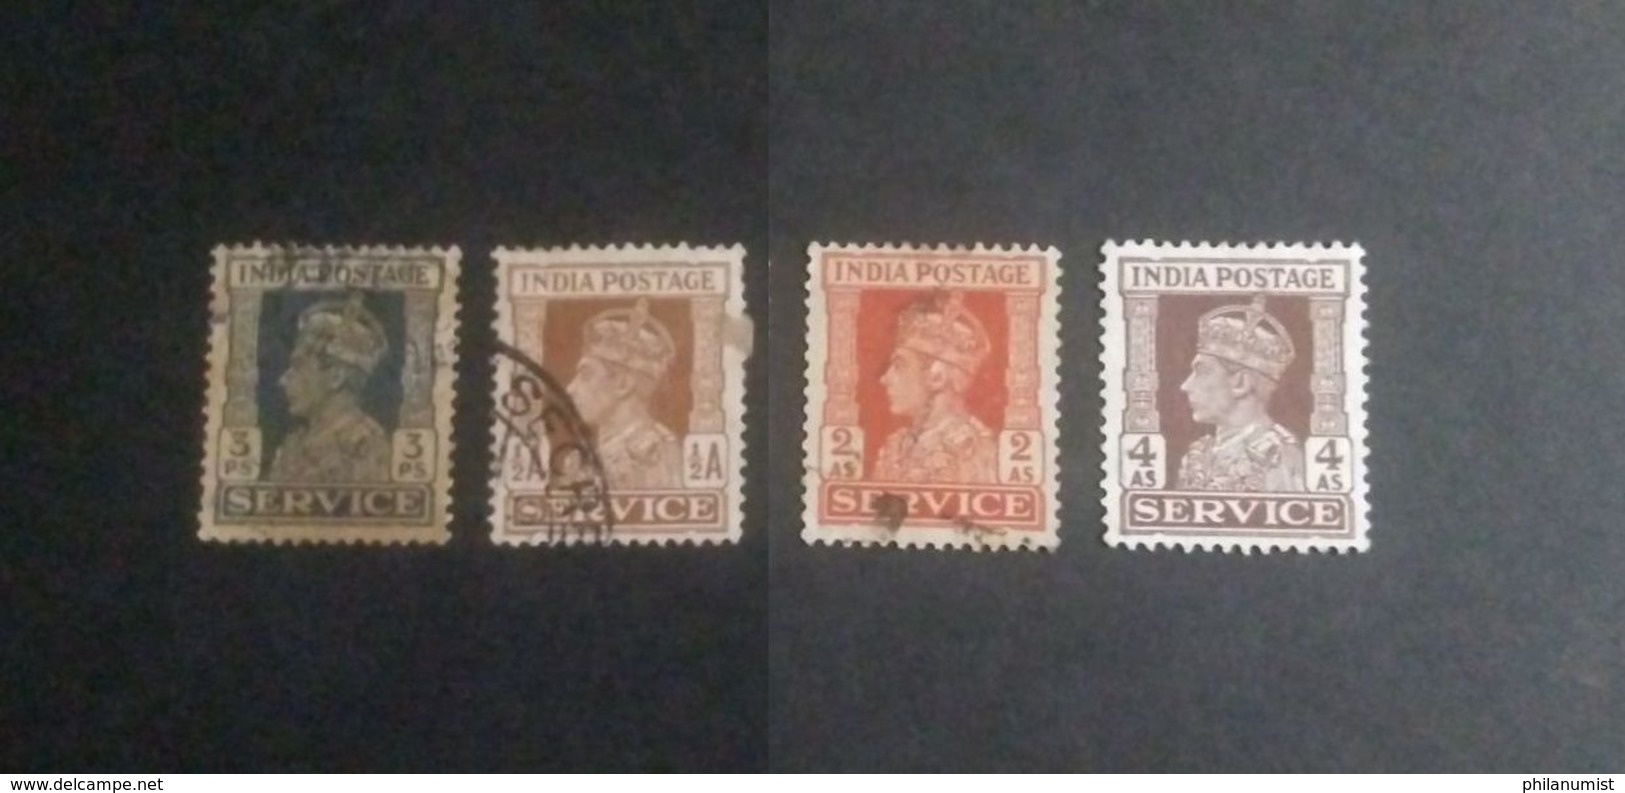 INDIA GEORGE VI OFFICIAL SERVICE STAMPS USED LOOK !! - 1936-47 King George VI